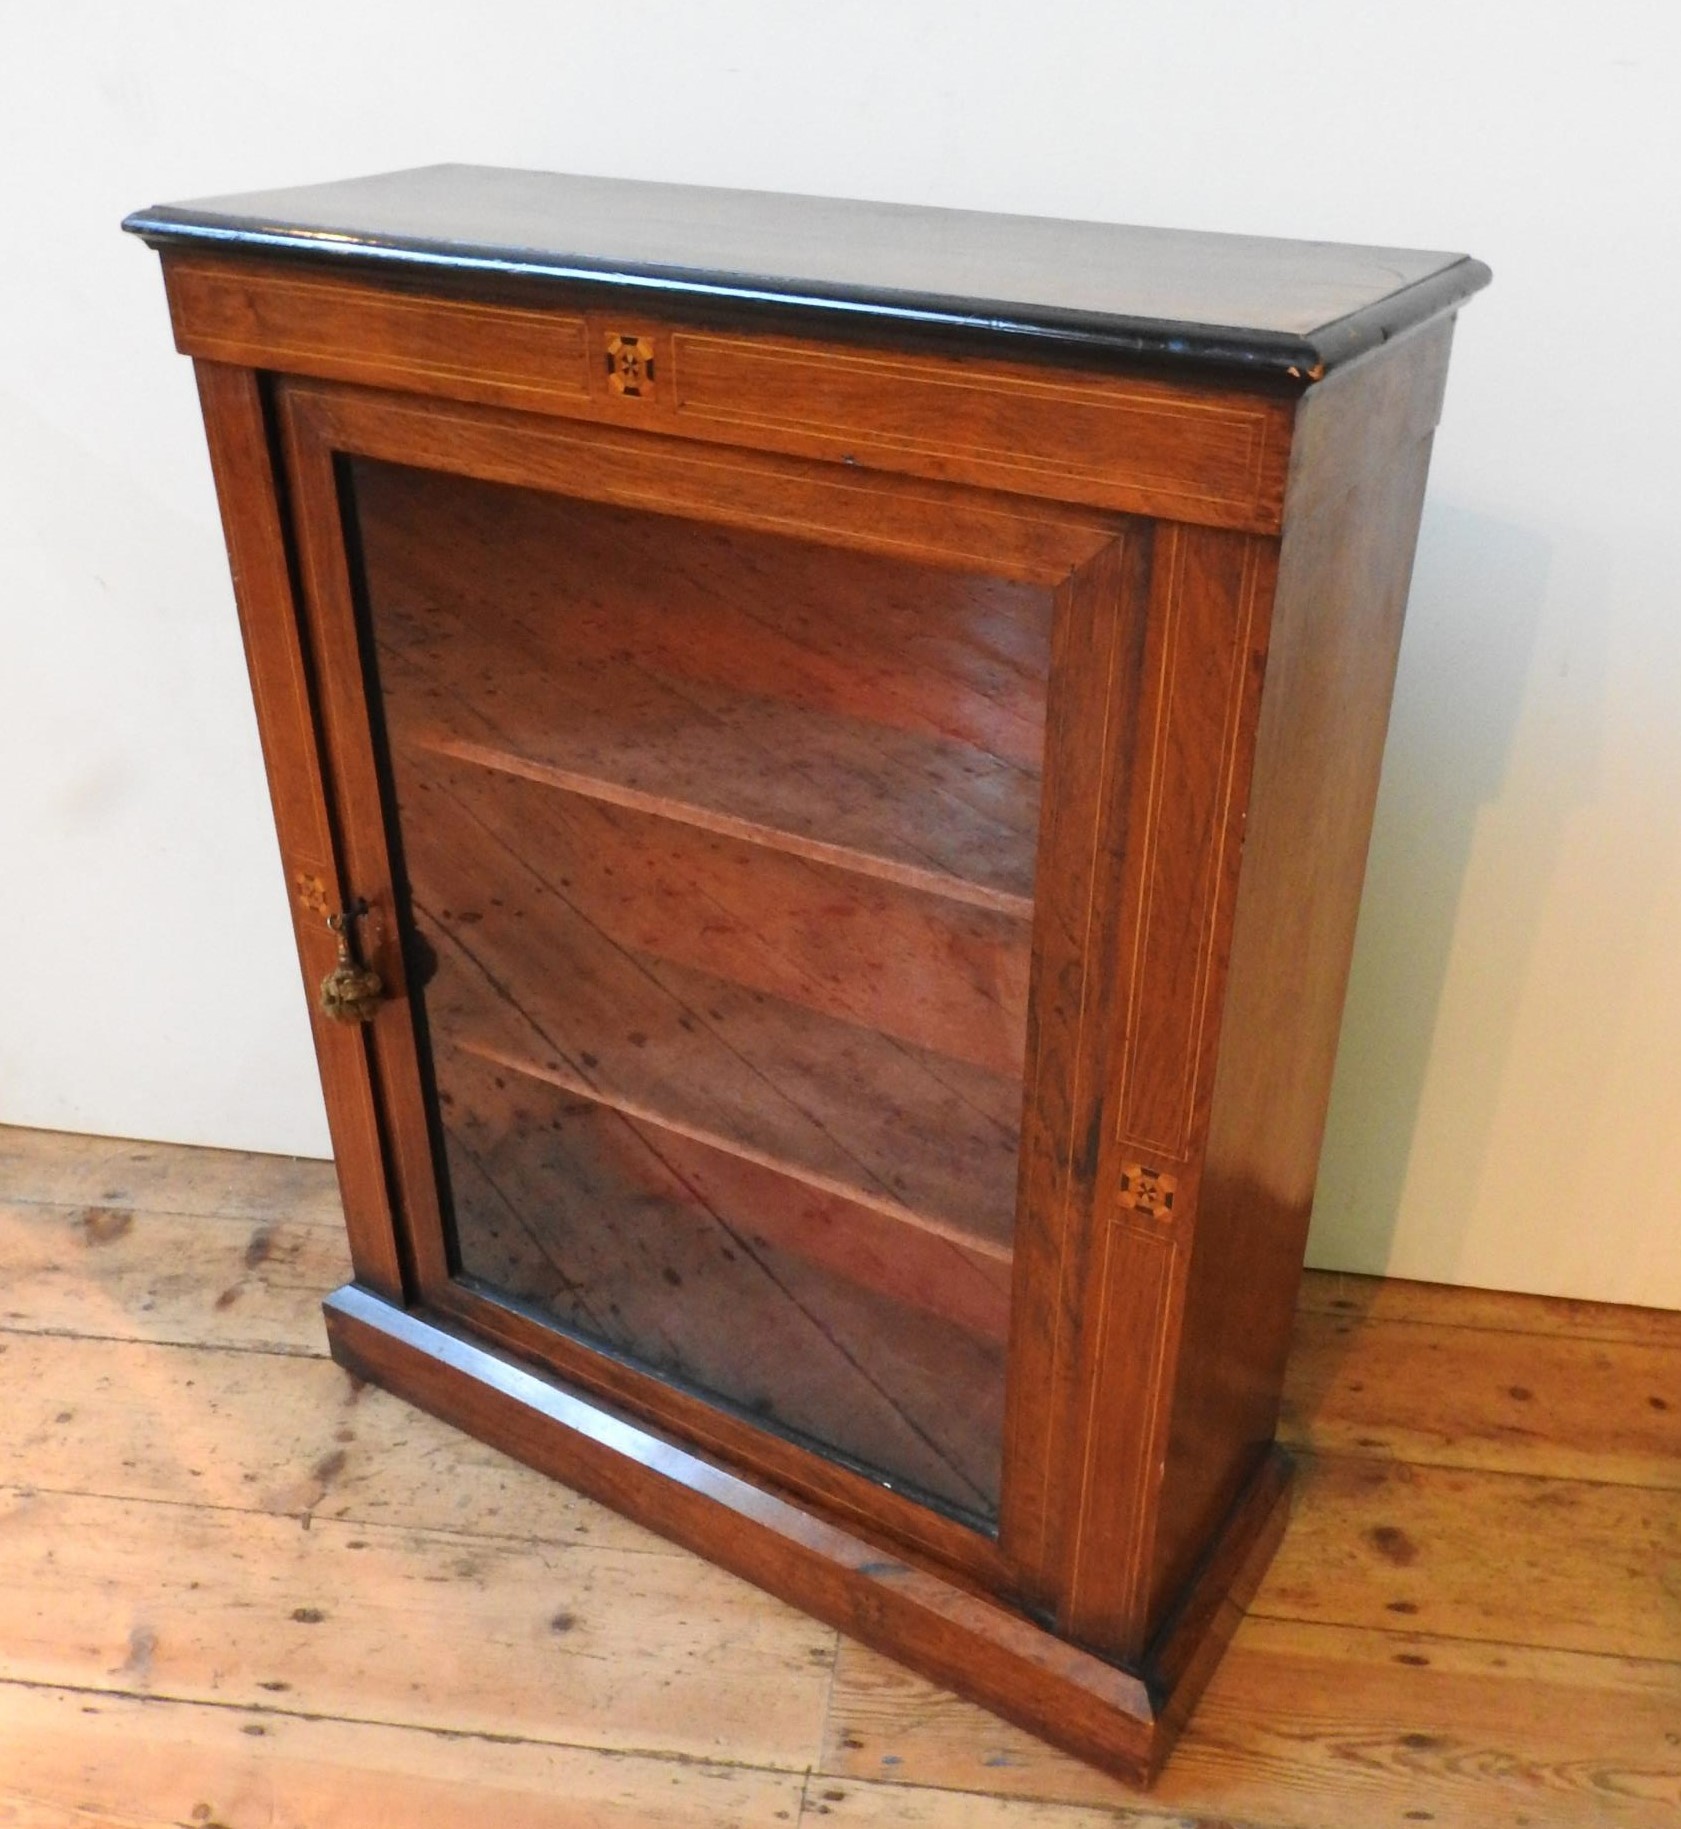 A LATE 19TH CENTURY  STRING INLAID ROSEWOOD GLAZED PIER CABINET, with two interior shelves, 110 x 86